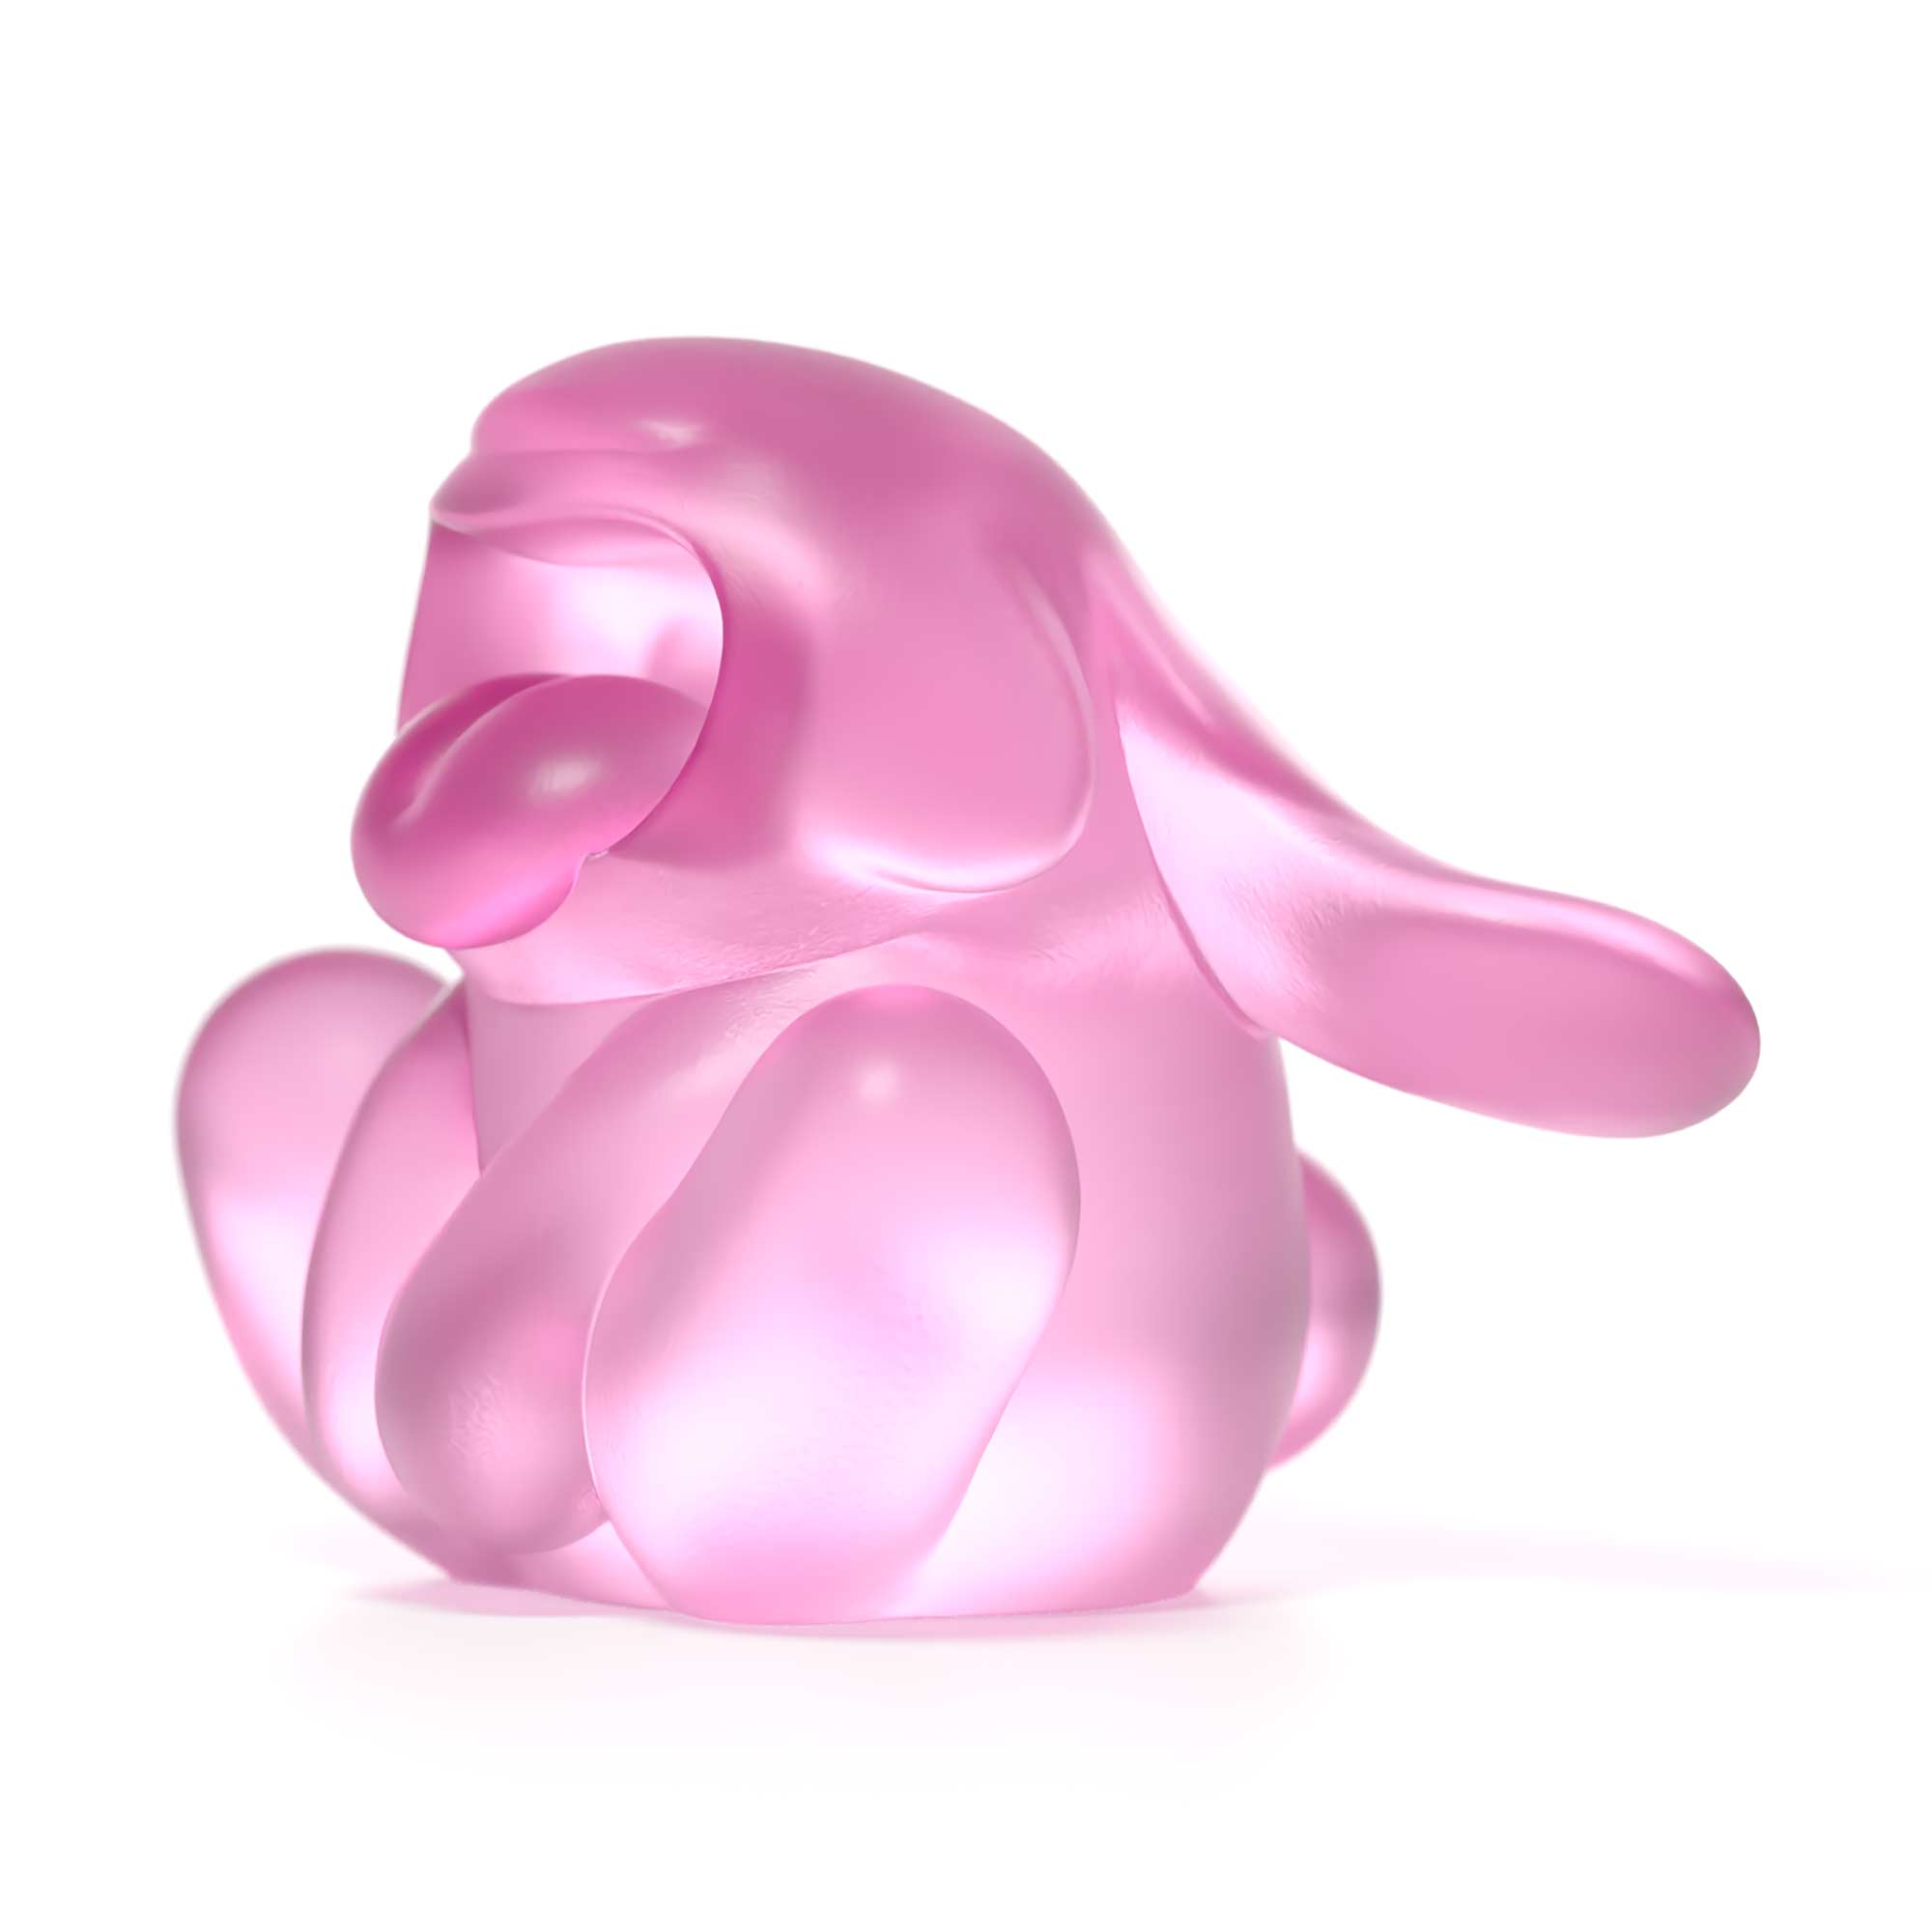 "Bunnie Roar Crystal," a sculpture, pink color, is an artistic creation by Ferdi B Dick 01  side view